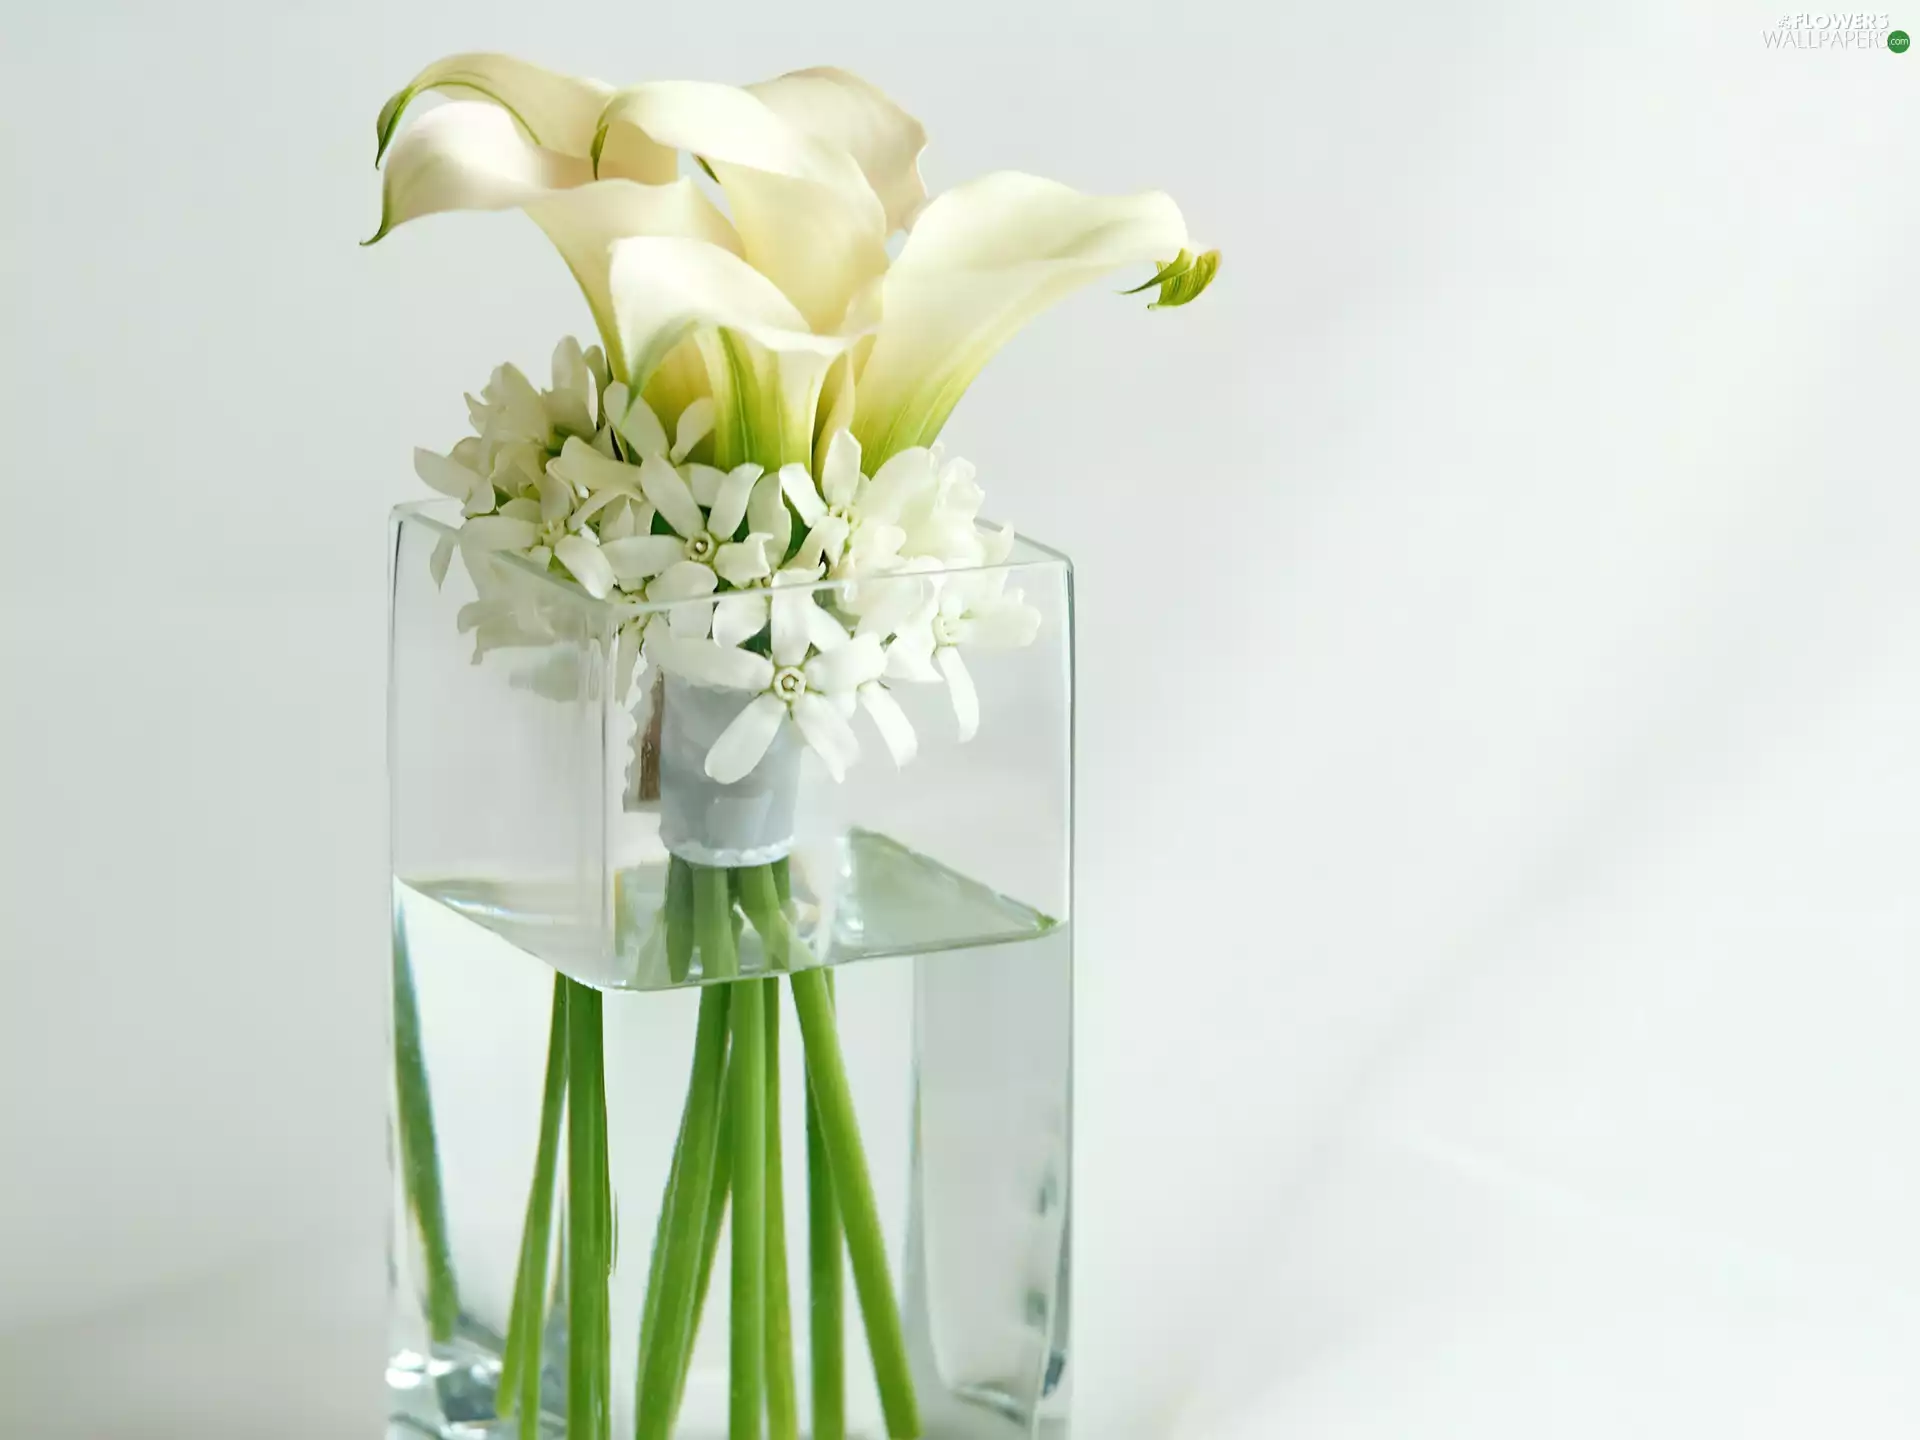 glass, Vase, white, flowers, composition